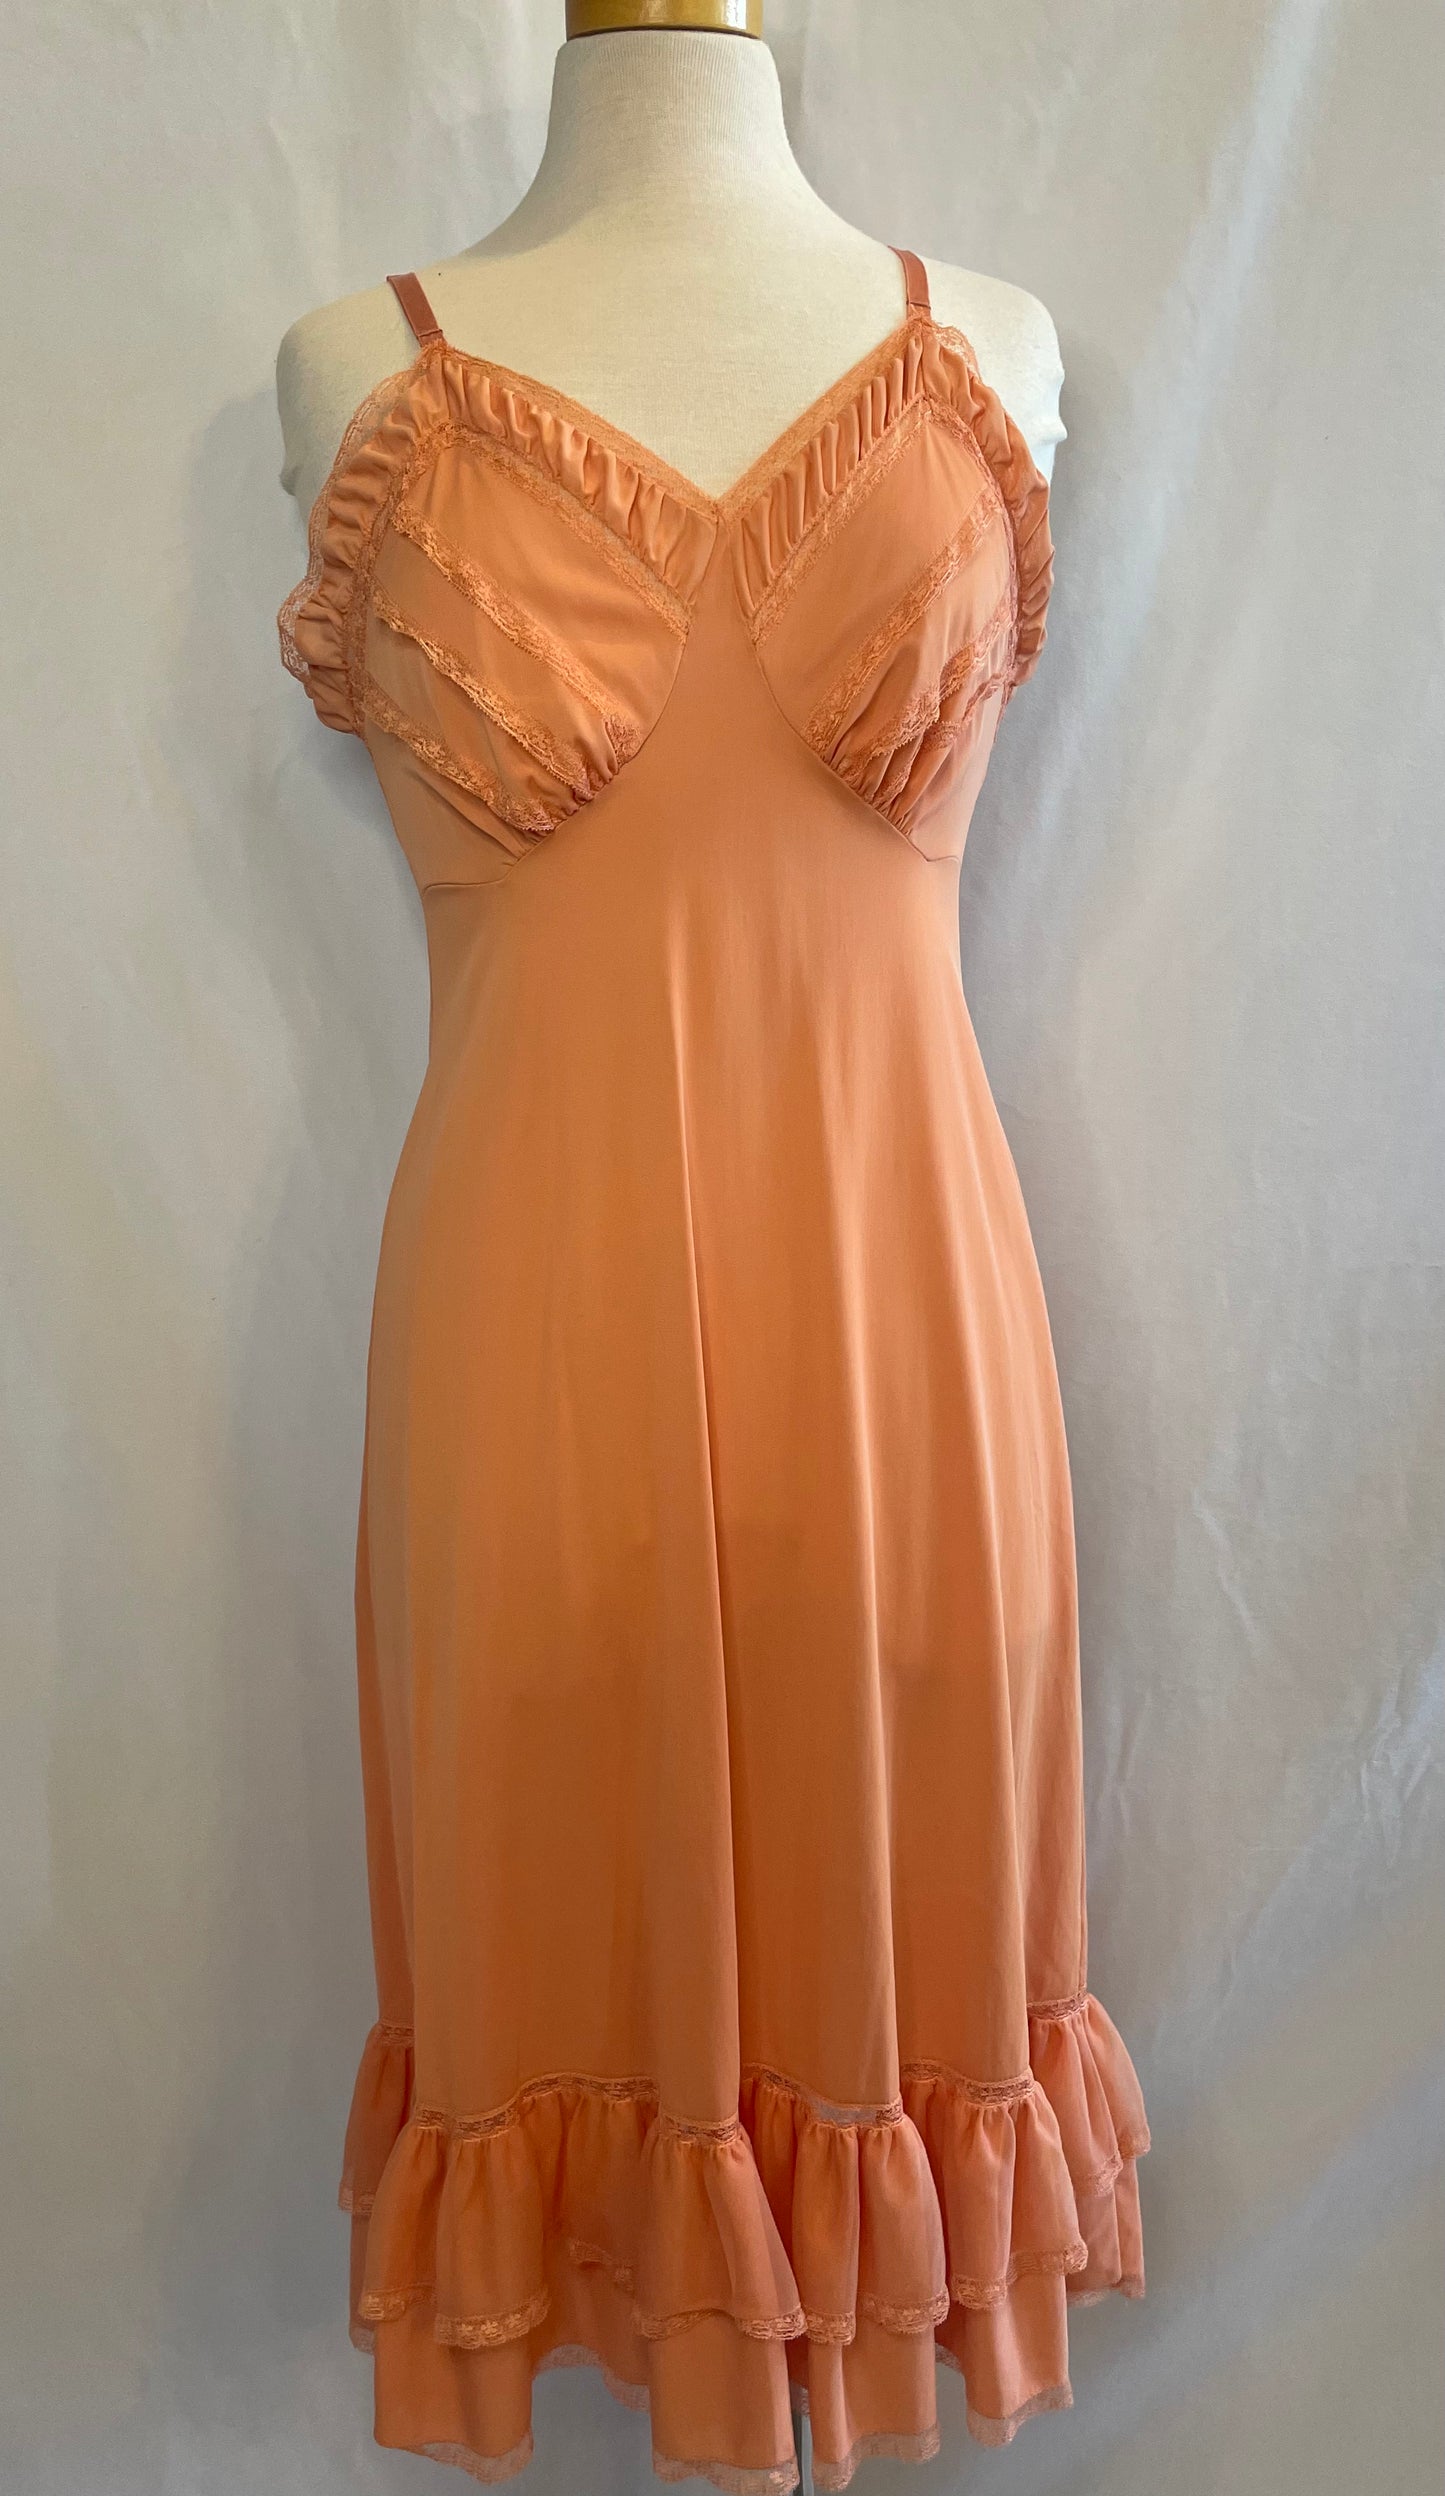 *RARE* Luxite by Holeproof Vintage 1940s/50s Peachy Lingerie